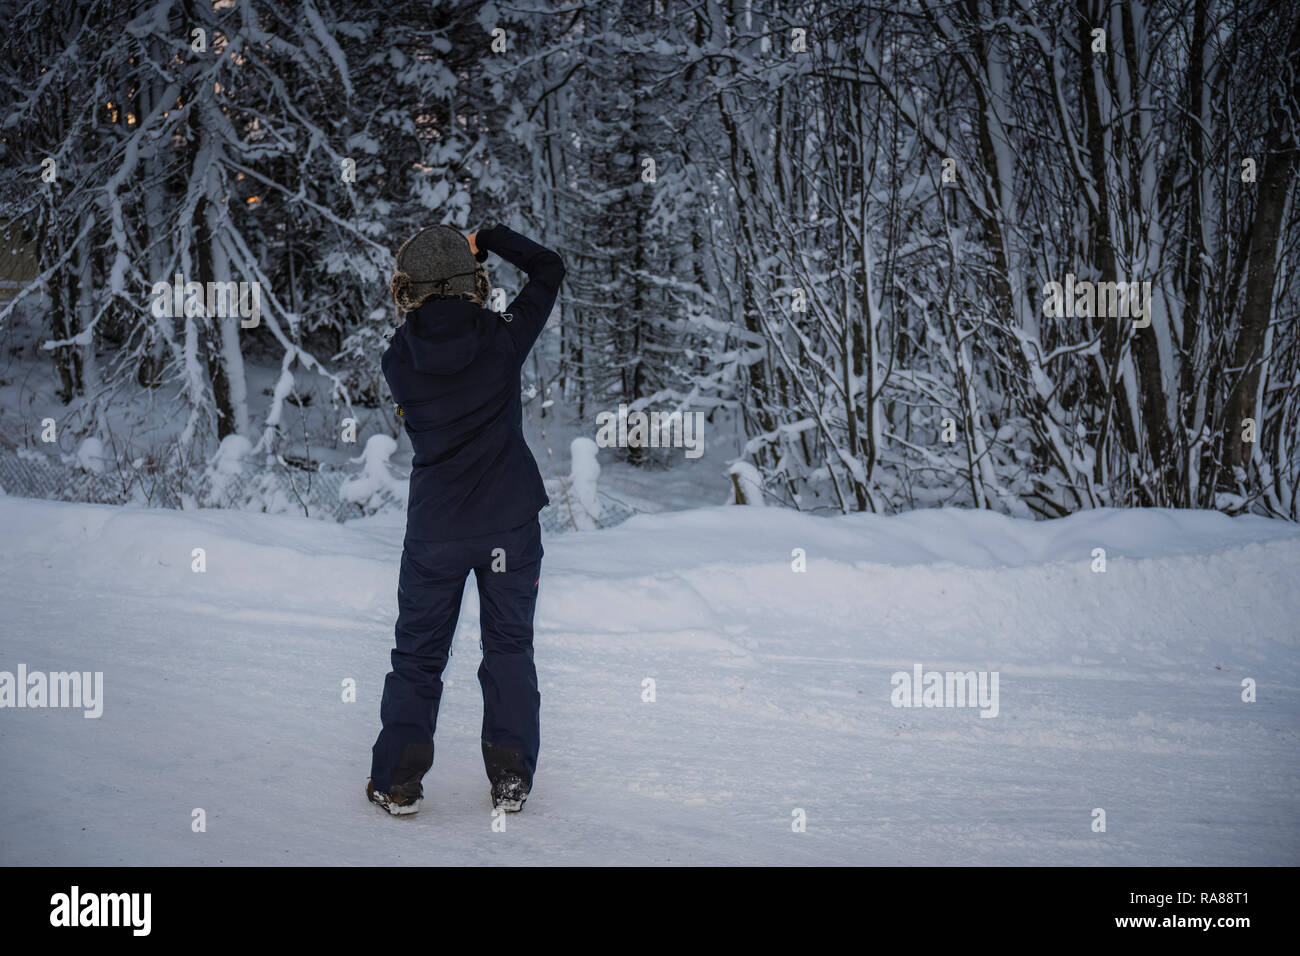 Female photographer capturing winter snows at Finnsnes, Norway. Stock Photo